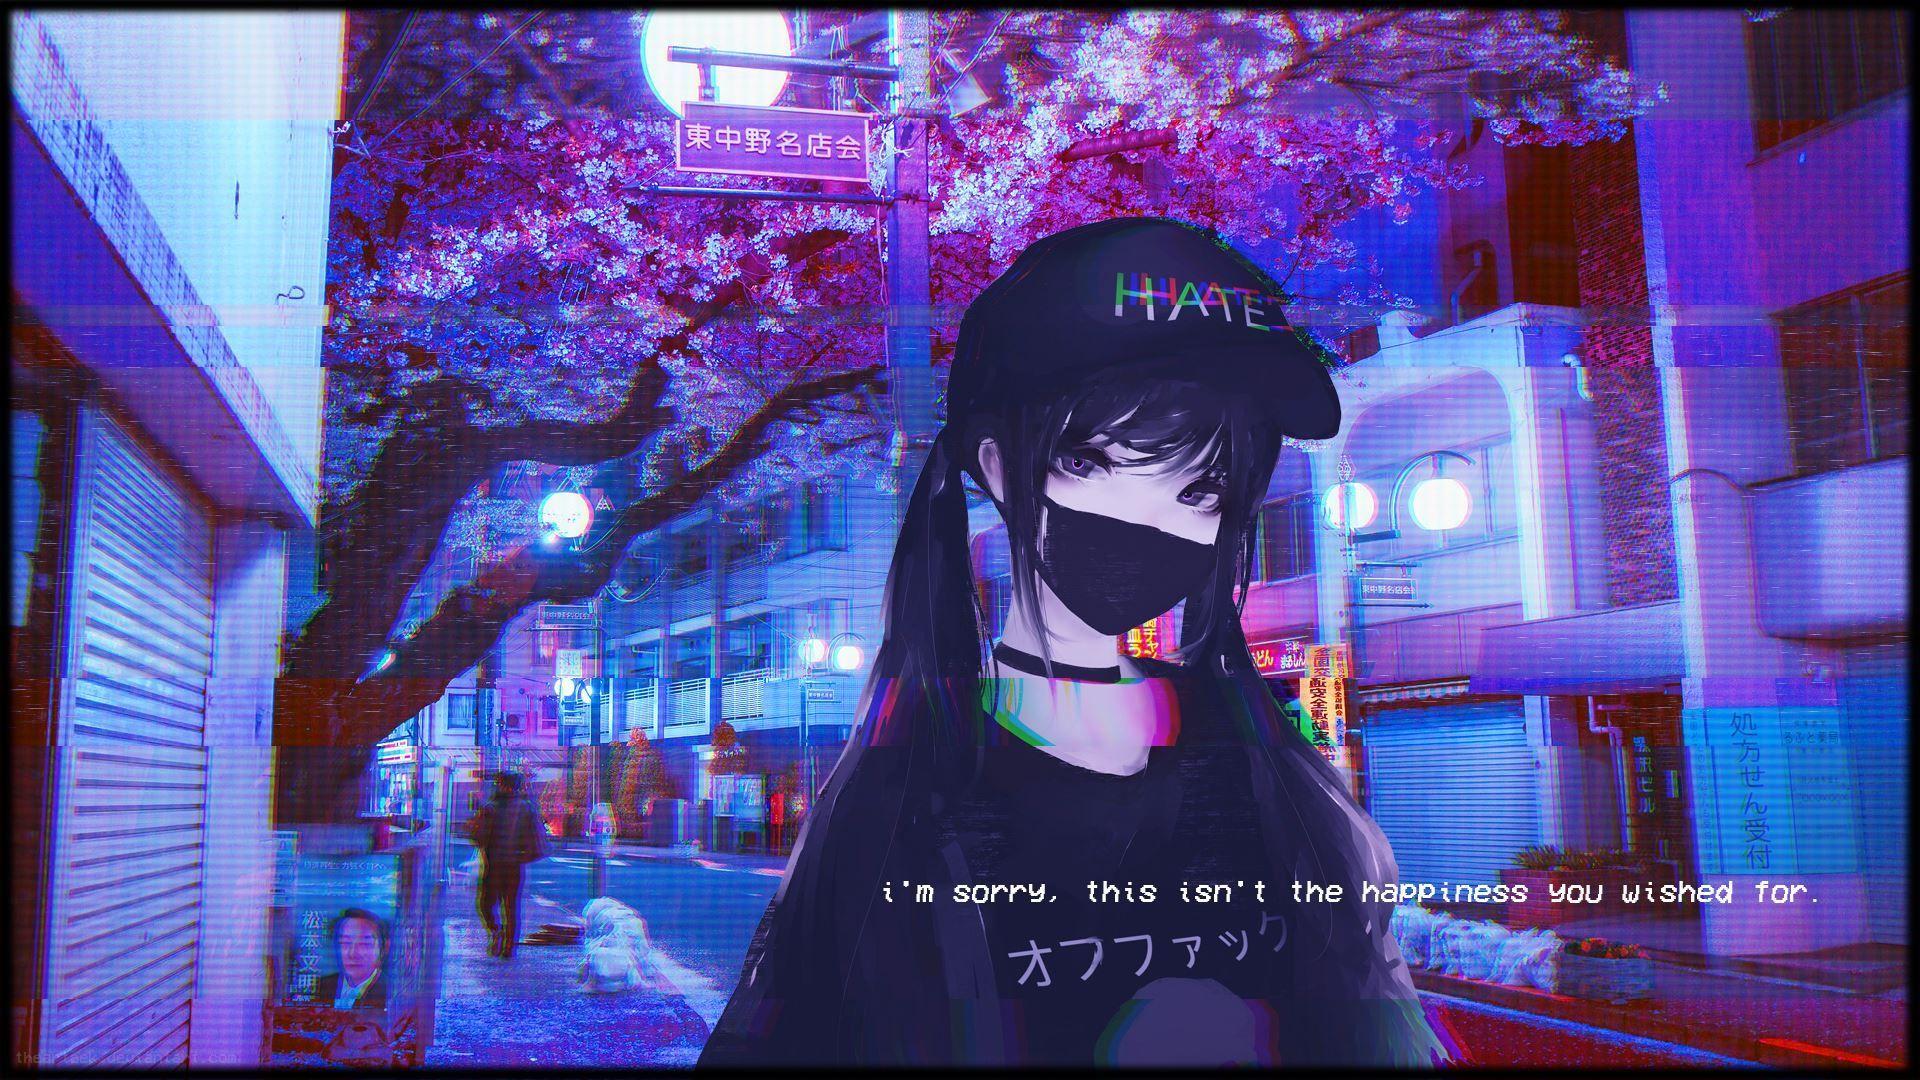 Vhs glitch anime girl wallpapers